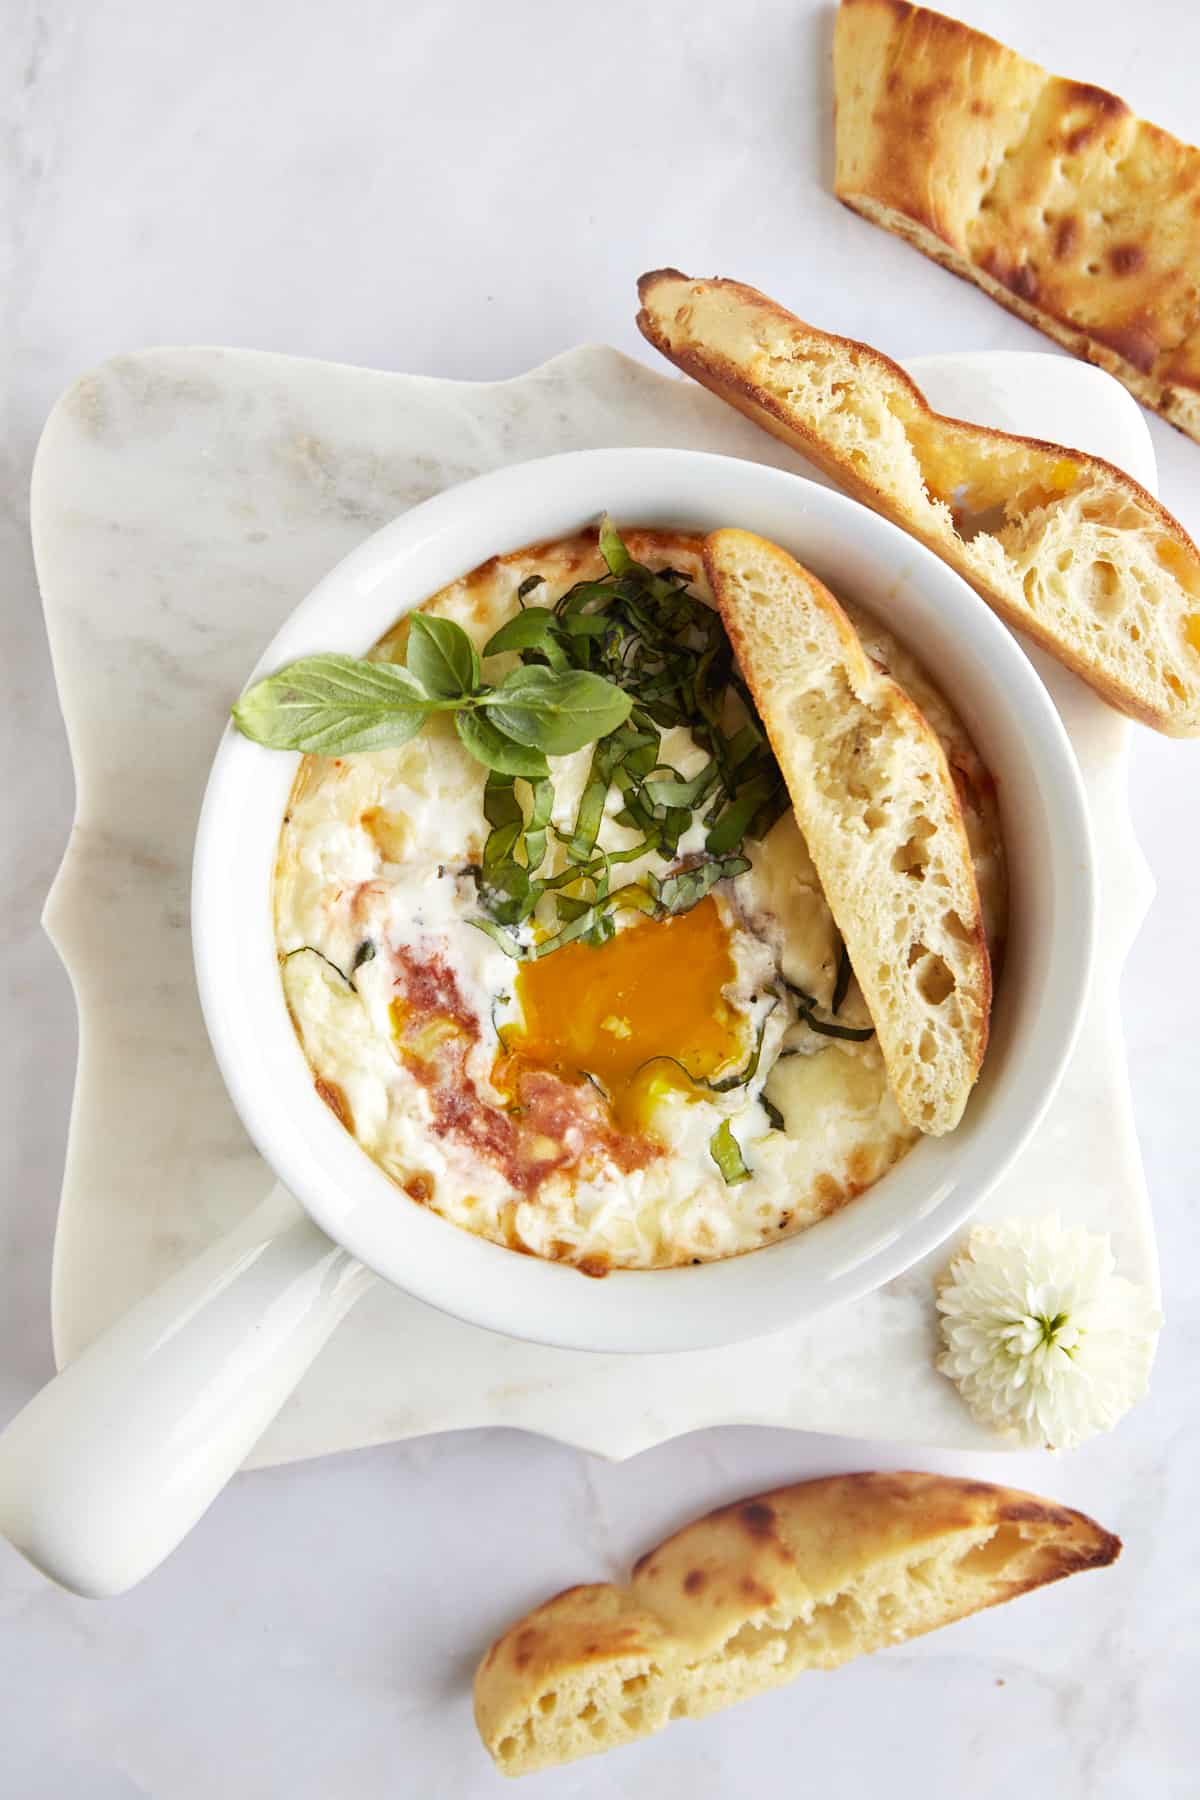 An egg yolk running over a ramekin full of Eggs in Purgatory with bread on the side. 